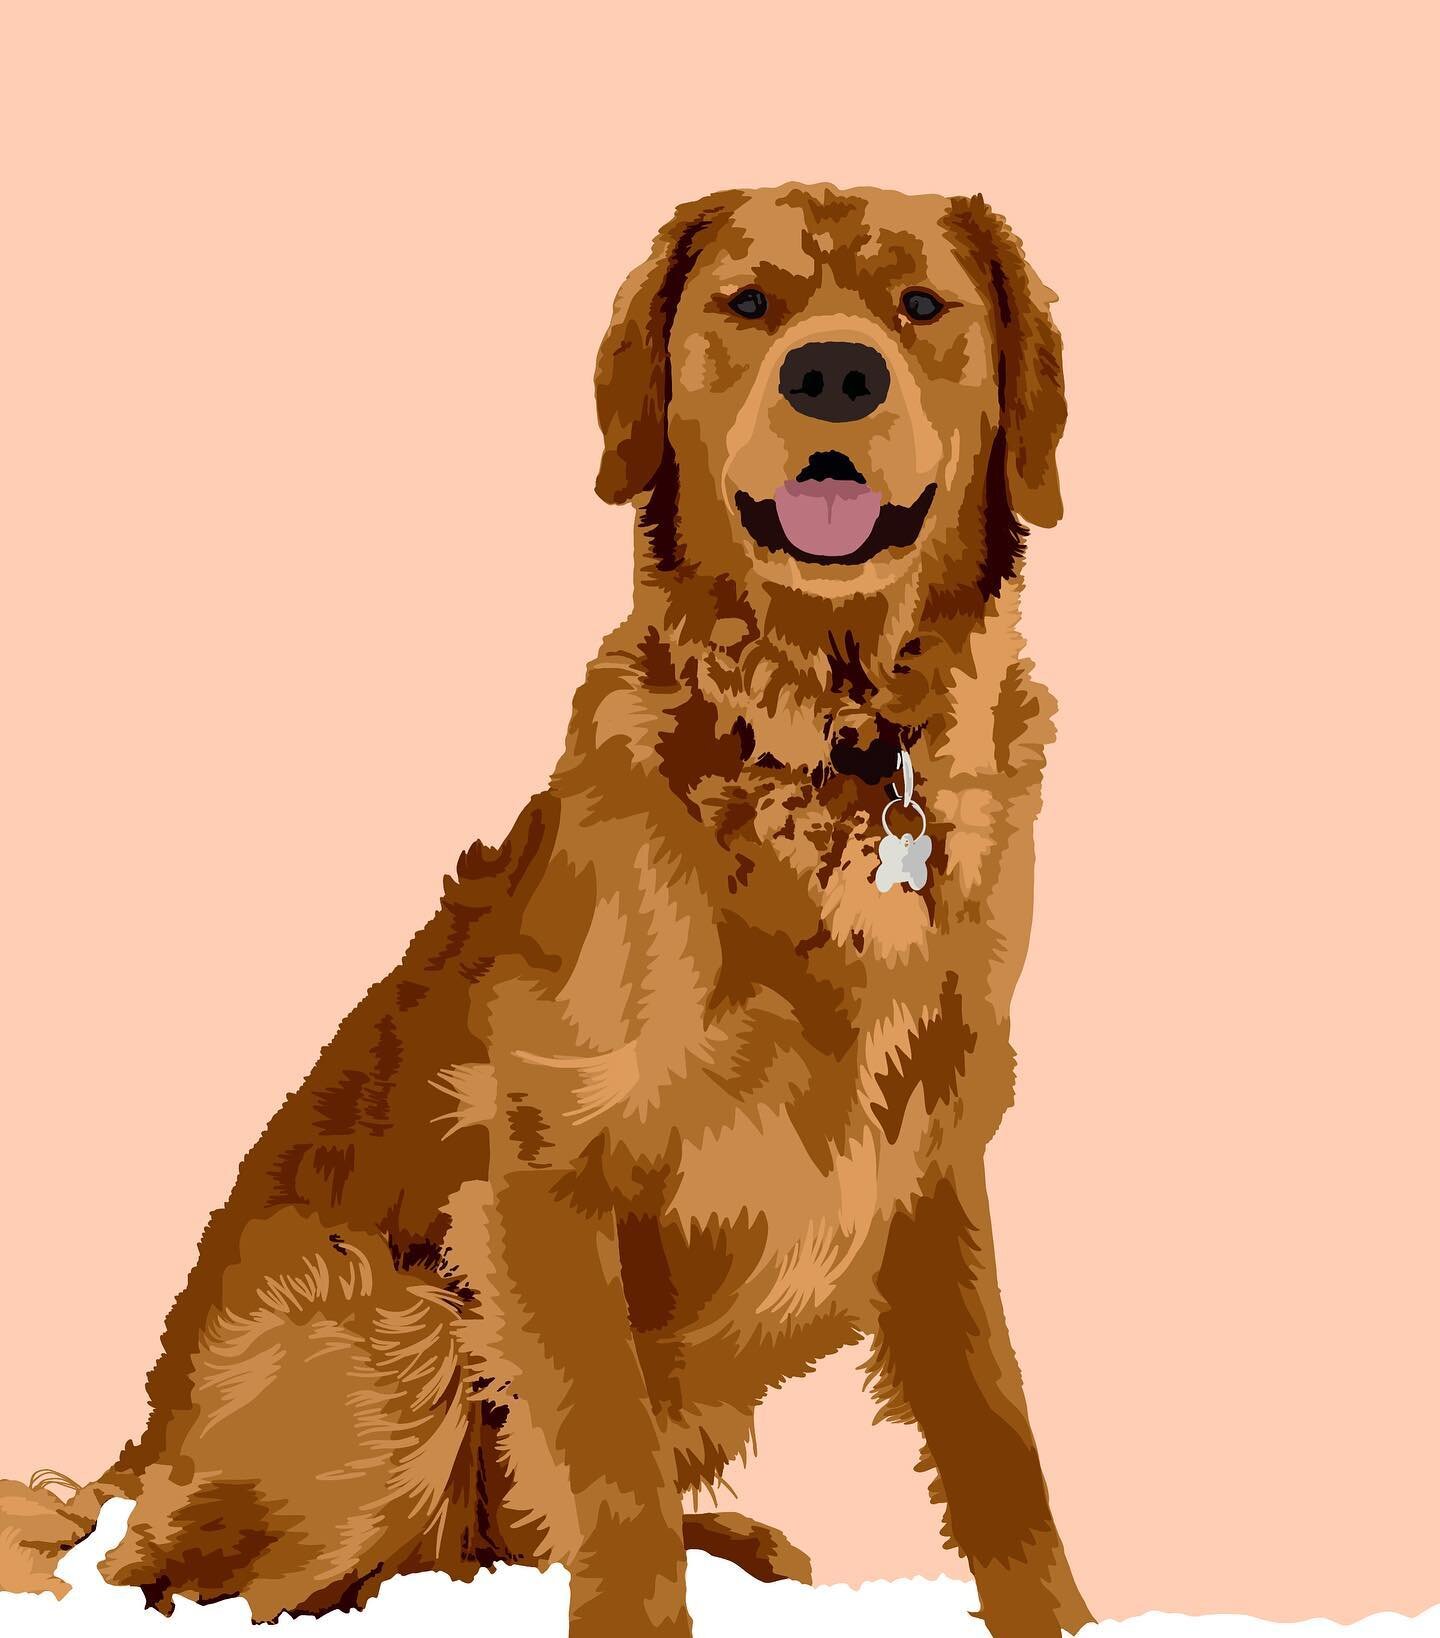 A recently finished pup illustration ✨ this one will be a housewarming gift for someone&rsquo;s brother-in-law (along with another illustration) - such a sweet idea!

Also - I don&rsquo;t know this buddy, but doesn&rsquo;t he look like a good boy?? S